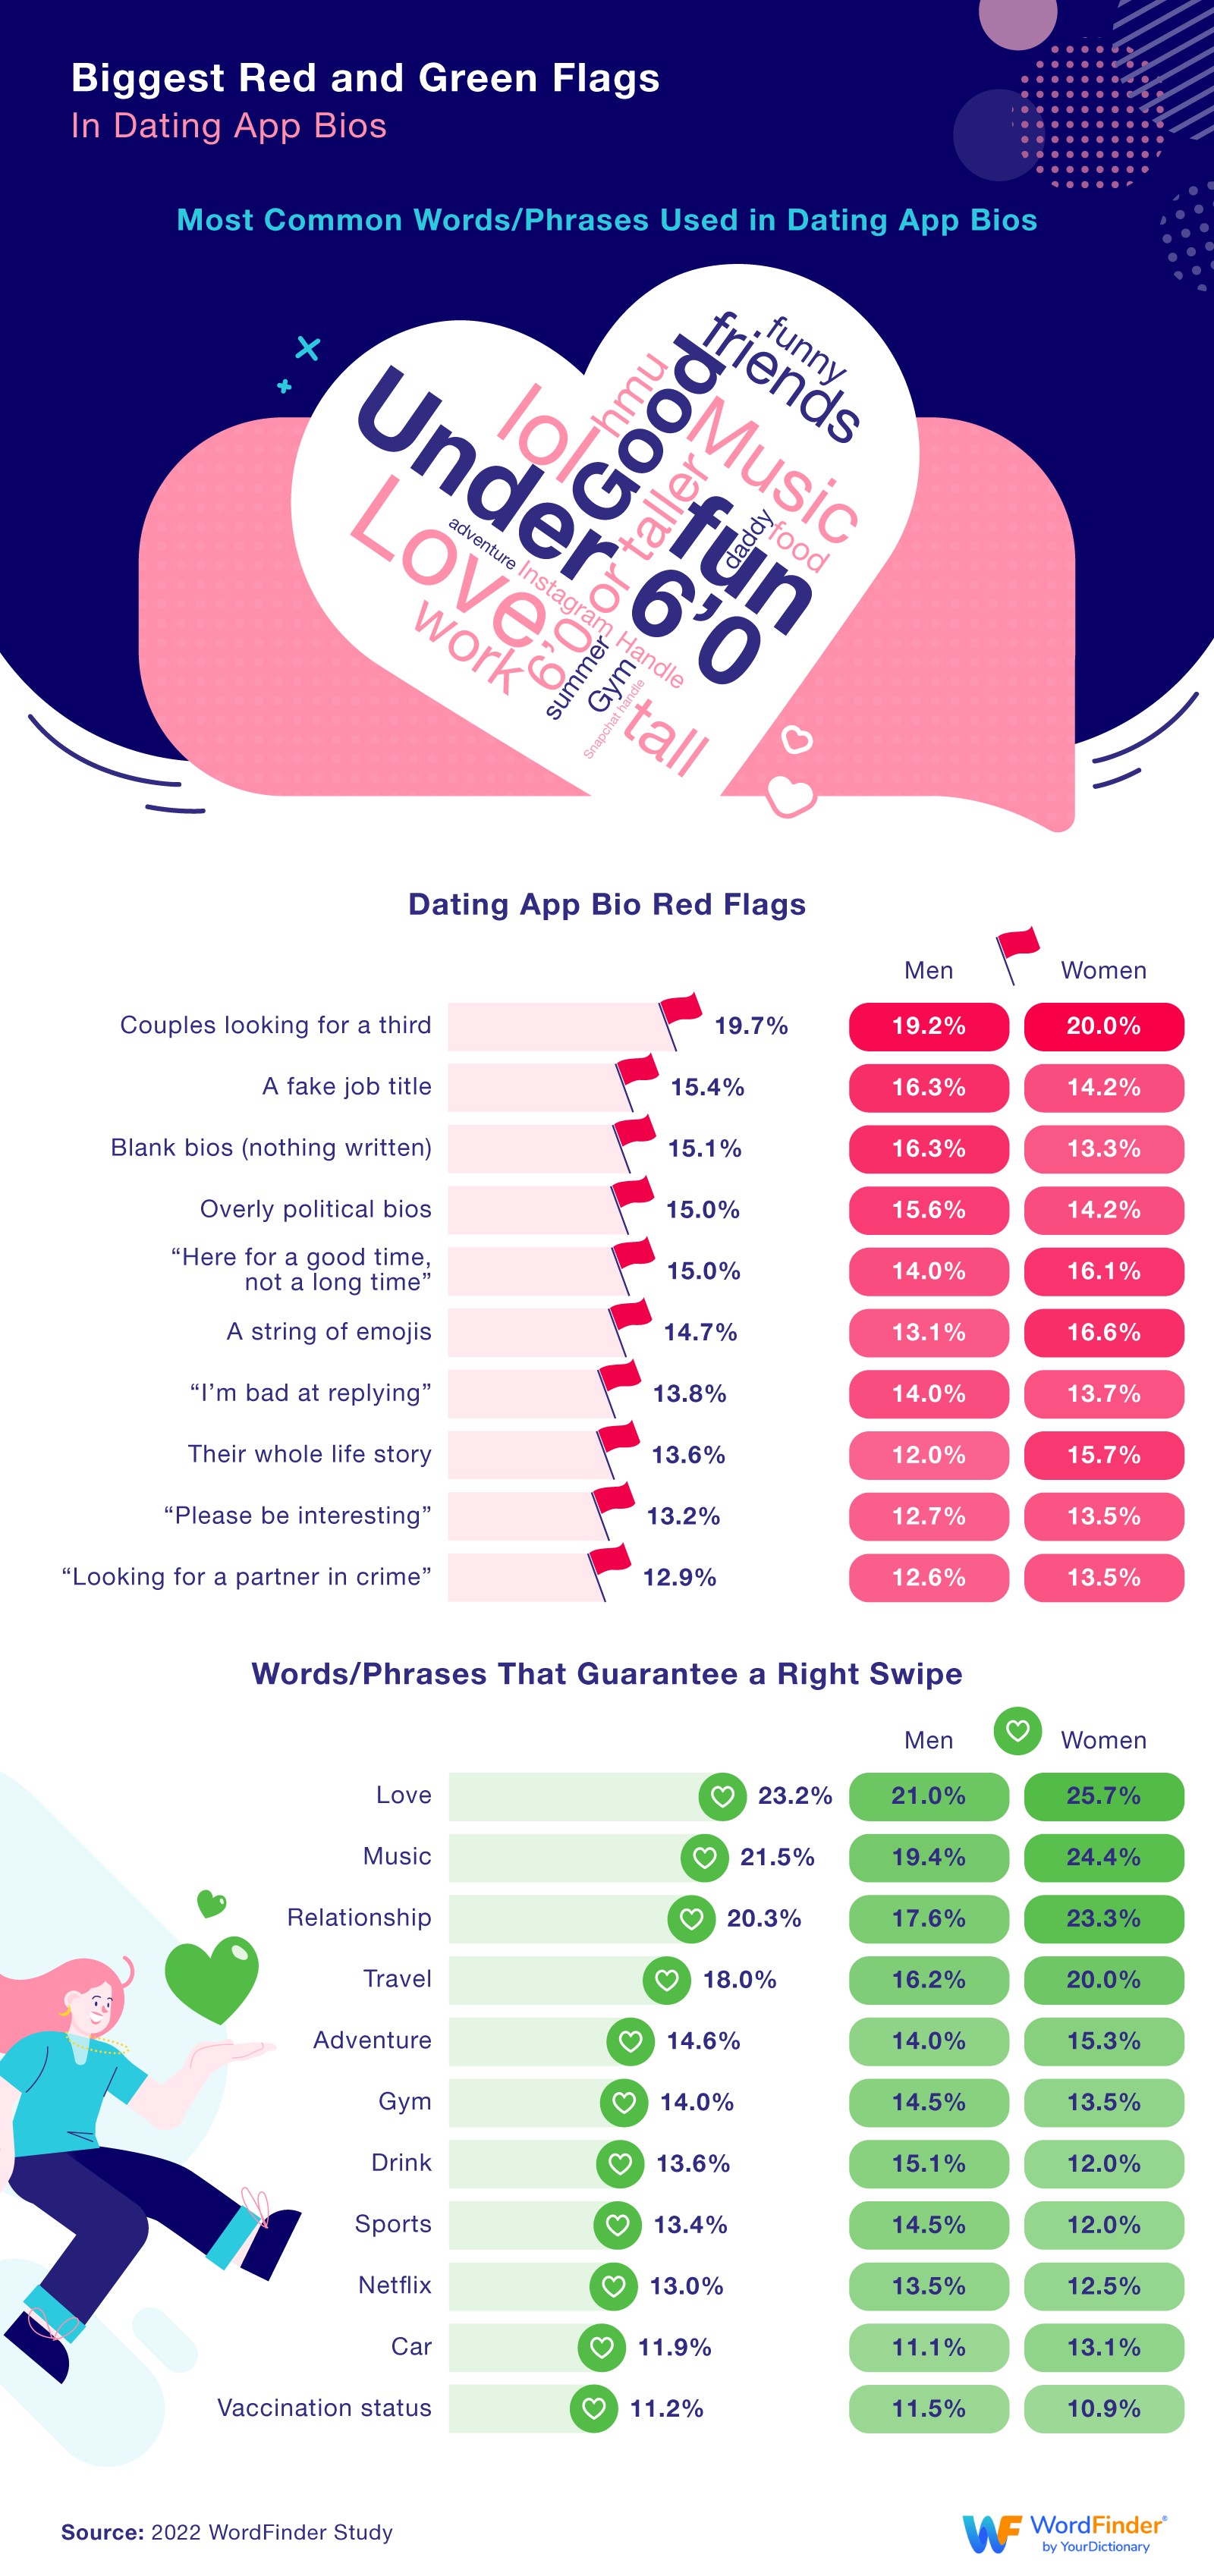 Red and green flags in dating app bios infographic